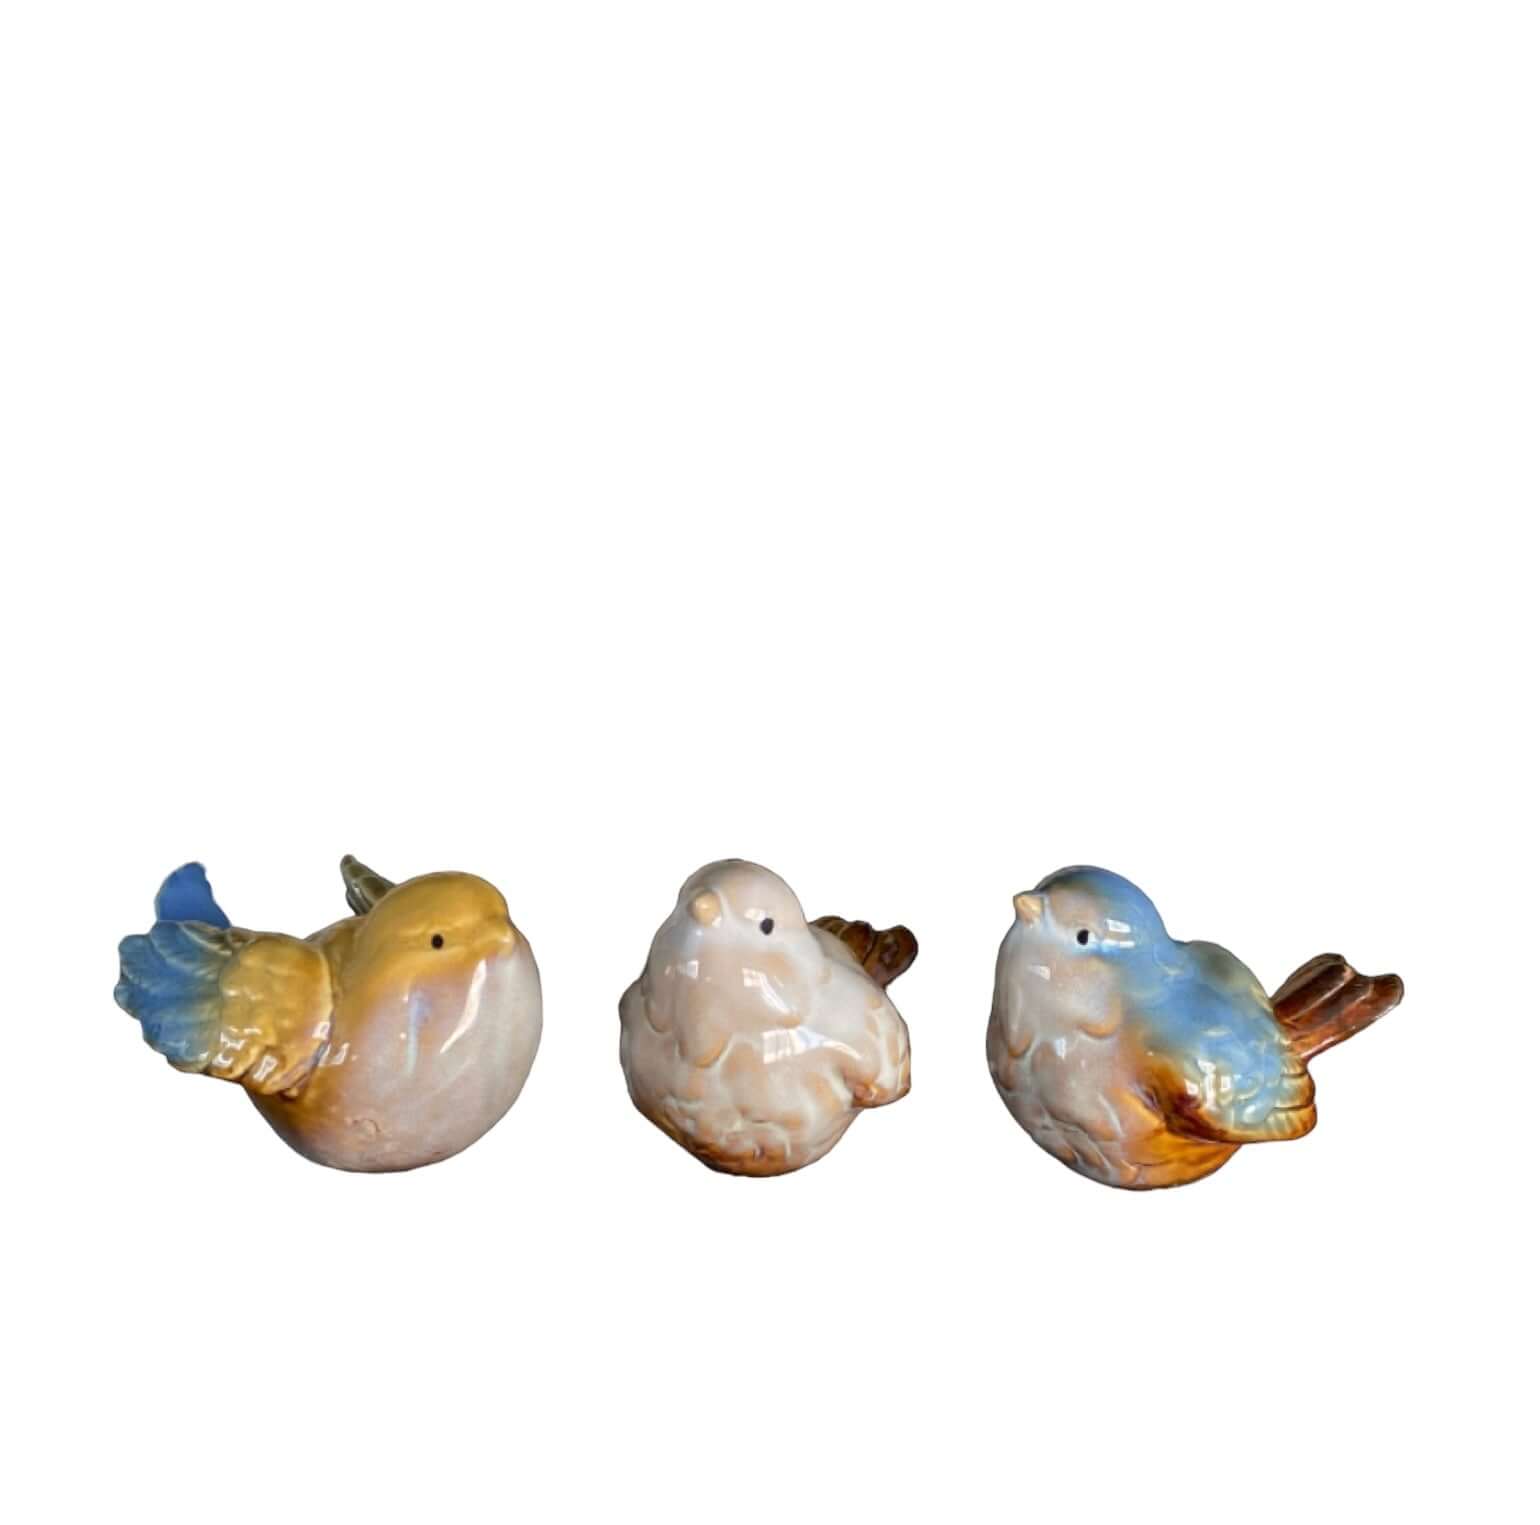 Bird Birds Natural Beauty Set Of 3 - The Renmy Store Homewares & Gifts 